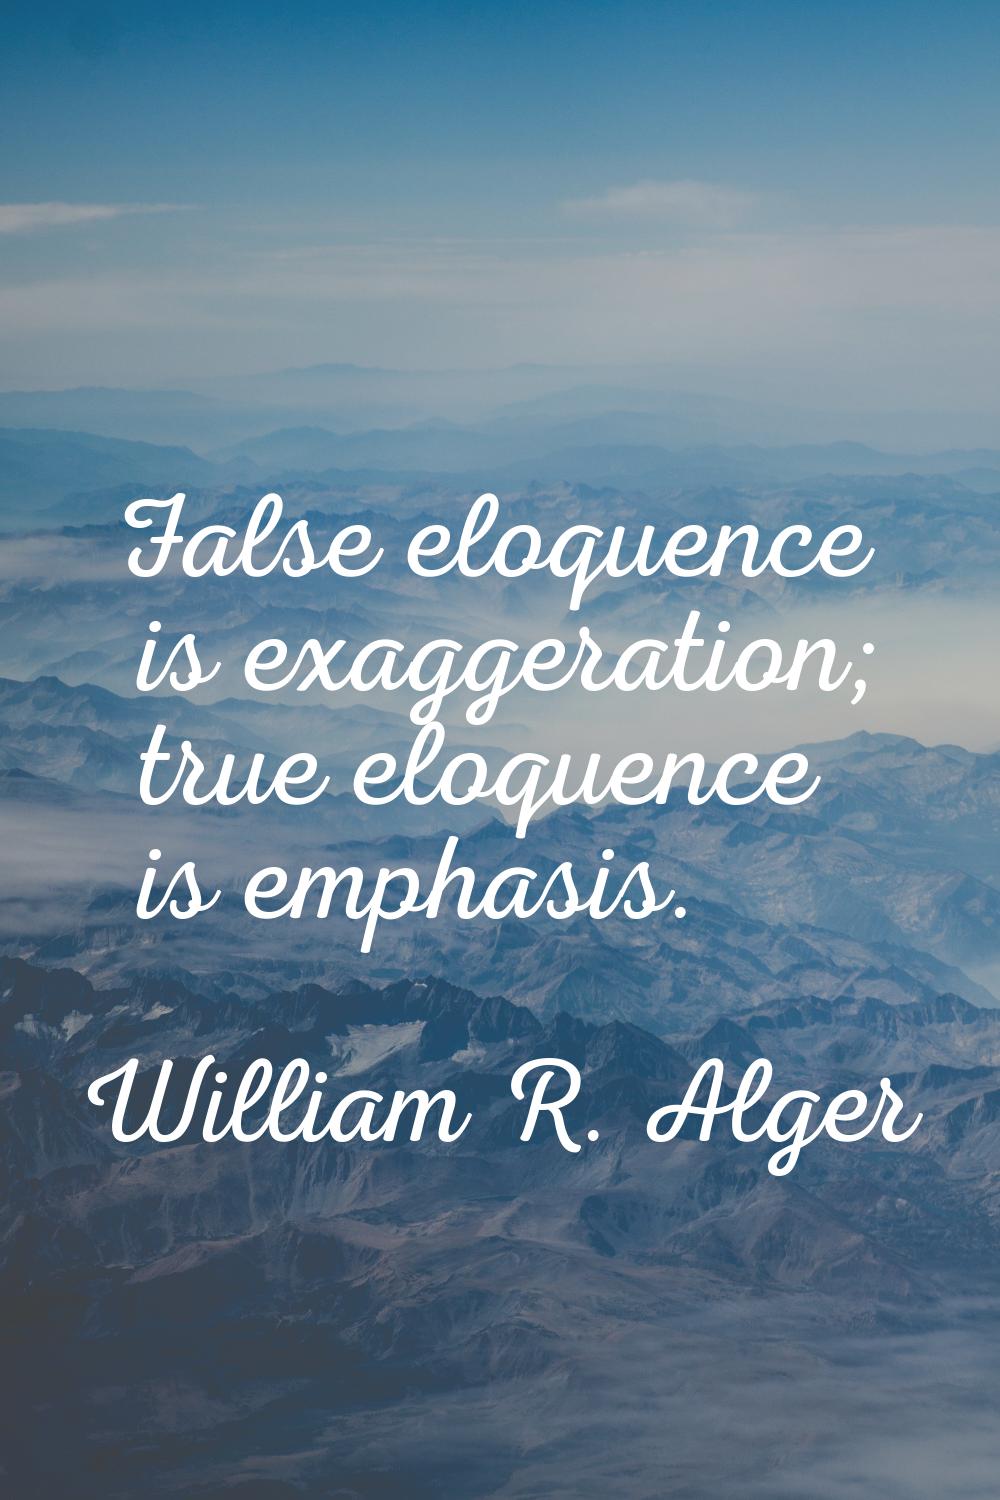 False eloquence is exaggeration; true eloquence is emphasis.